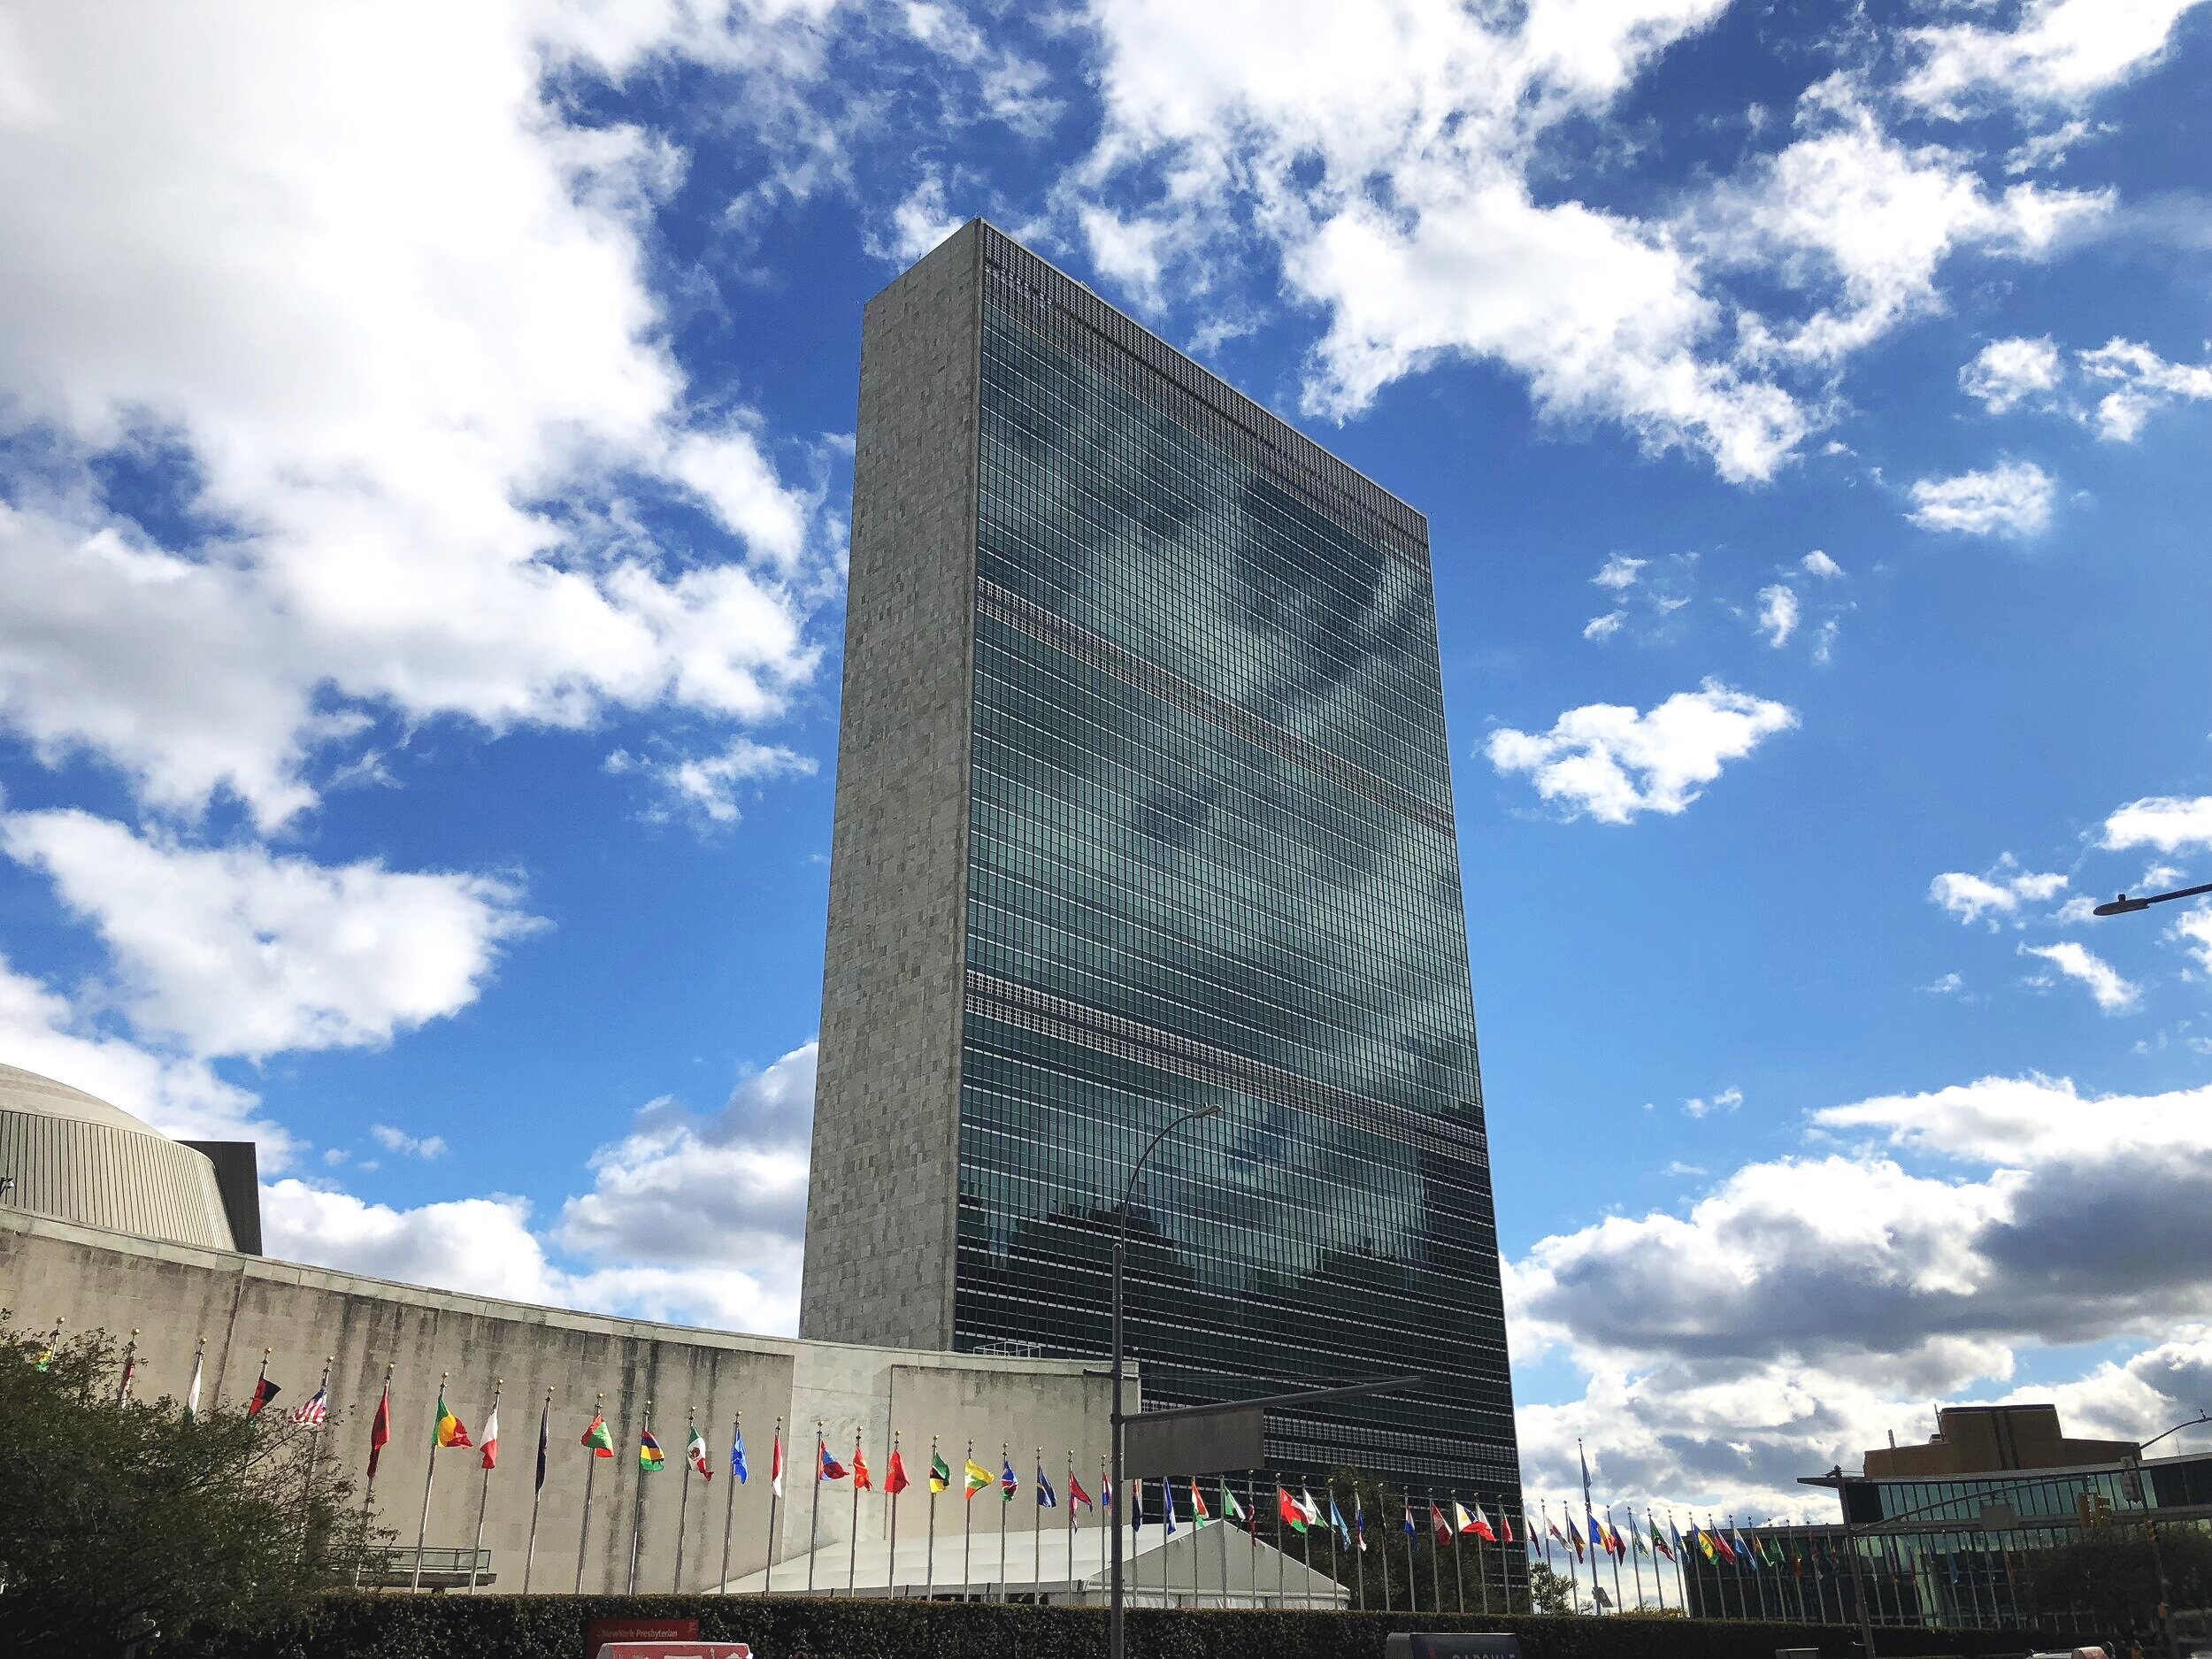 7 types of people who shouldn’t work for the UN: Are you on the list?